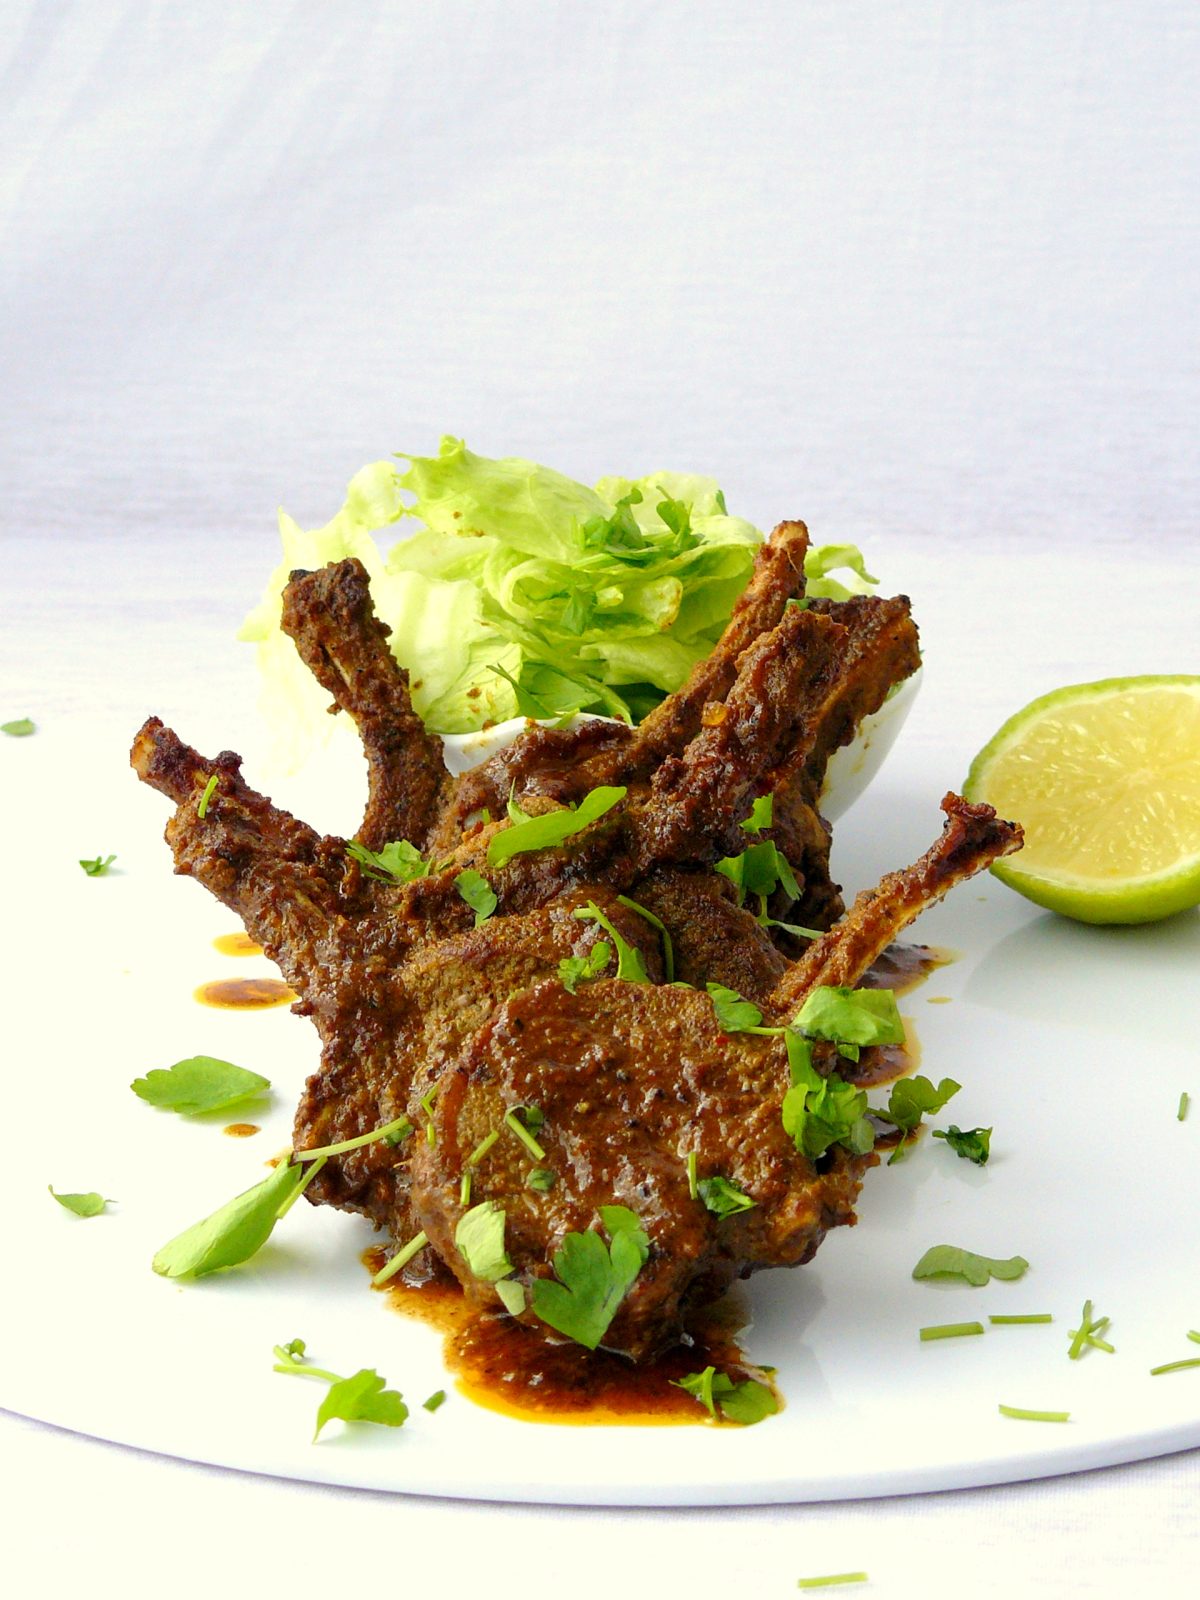 Vindaloo Lamb Chops - succulent, delicately frenched lamb chops smothered with the lipsmacking vindaloo marinade - thespiceadventuress.com